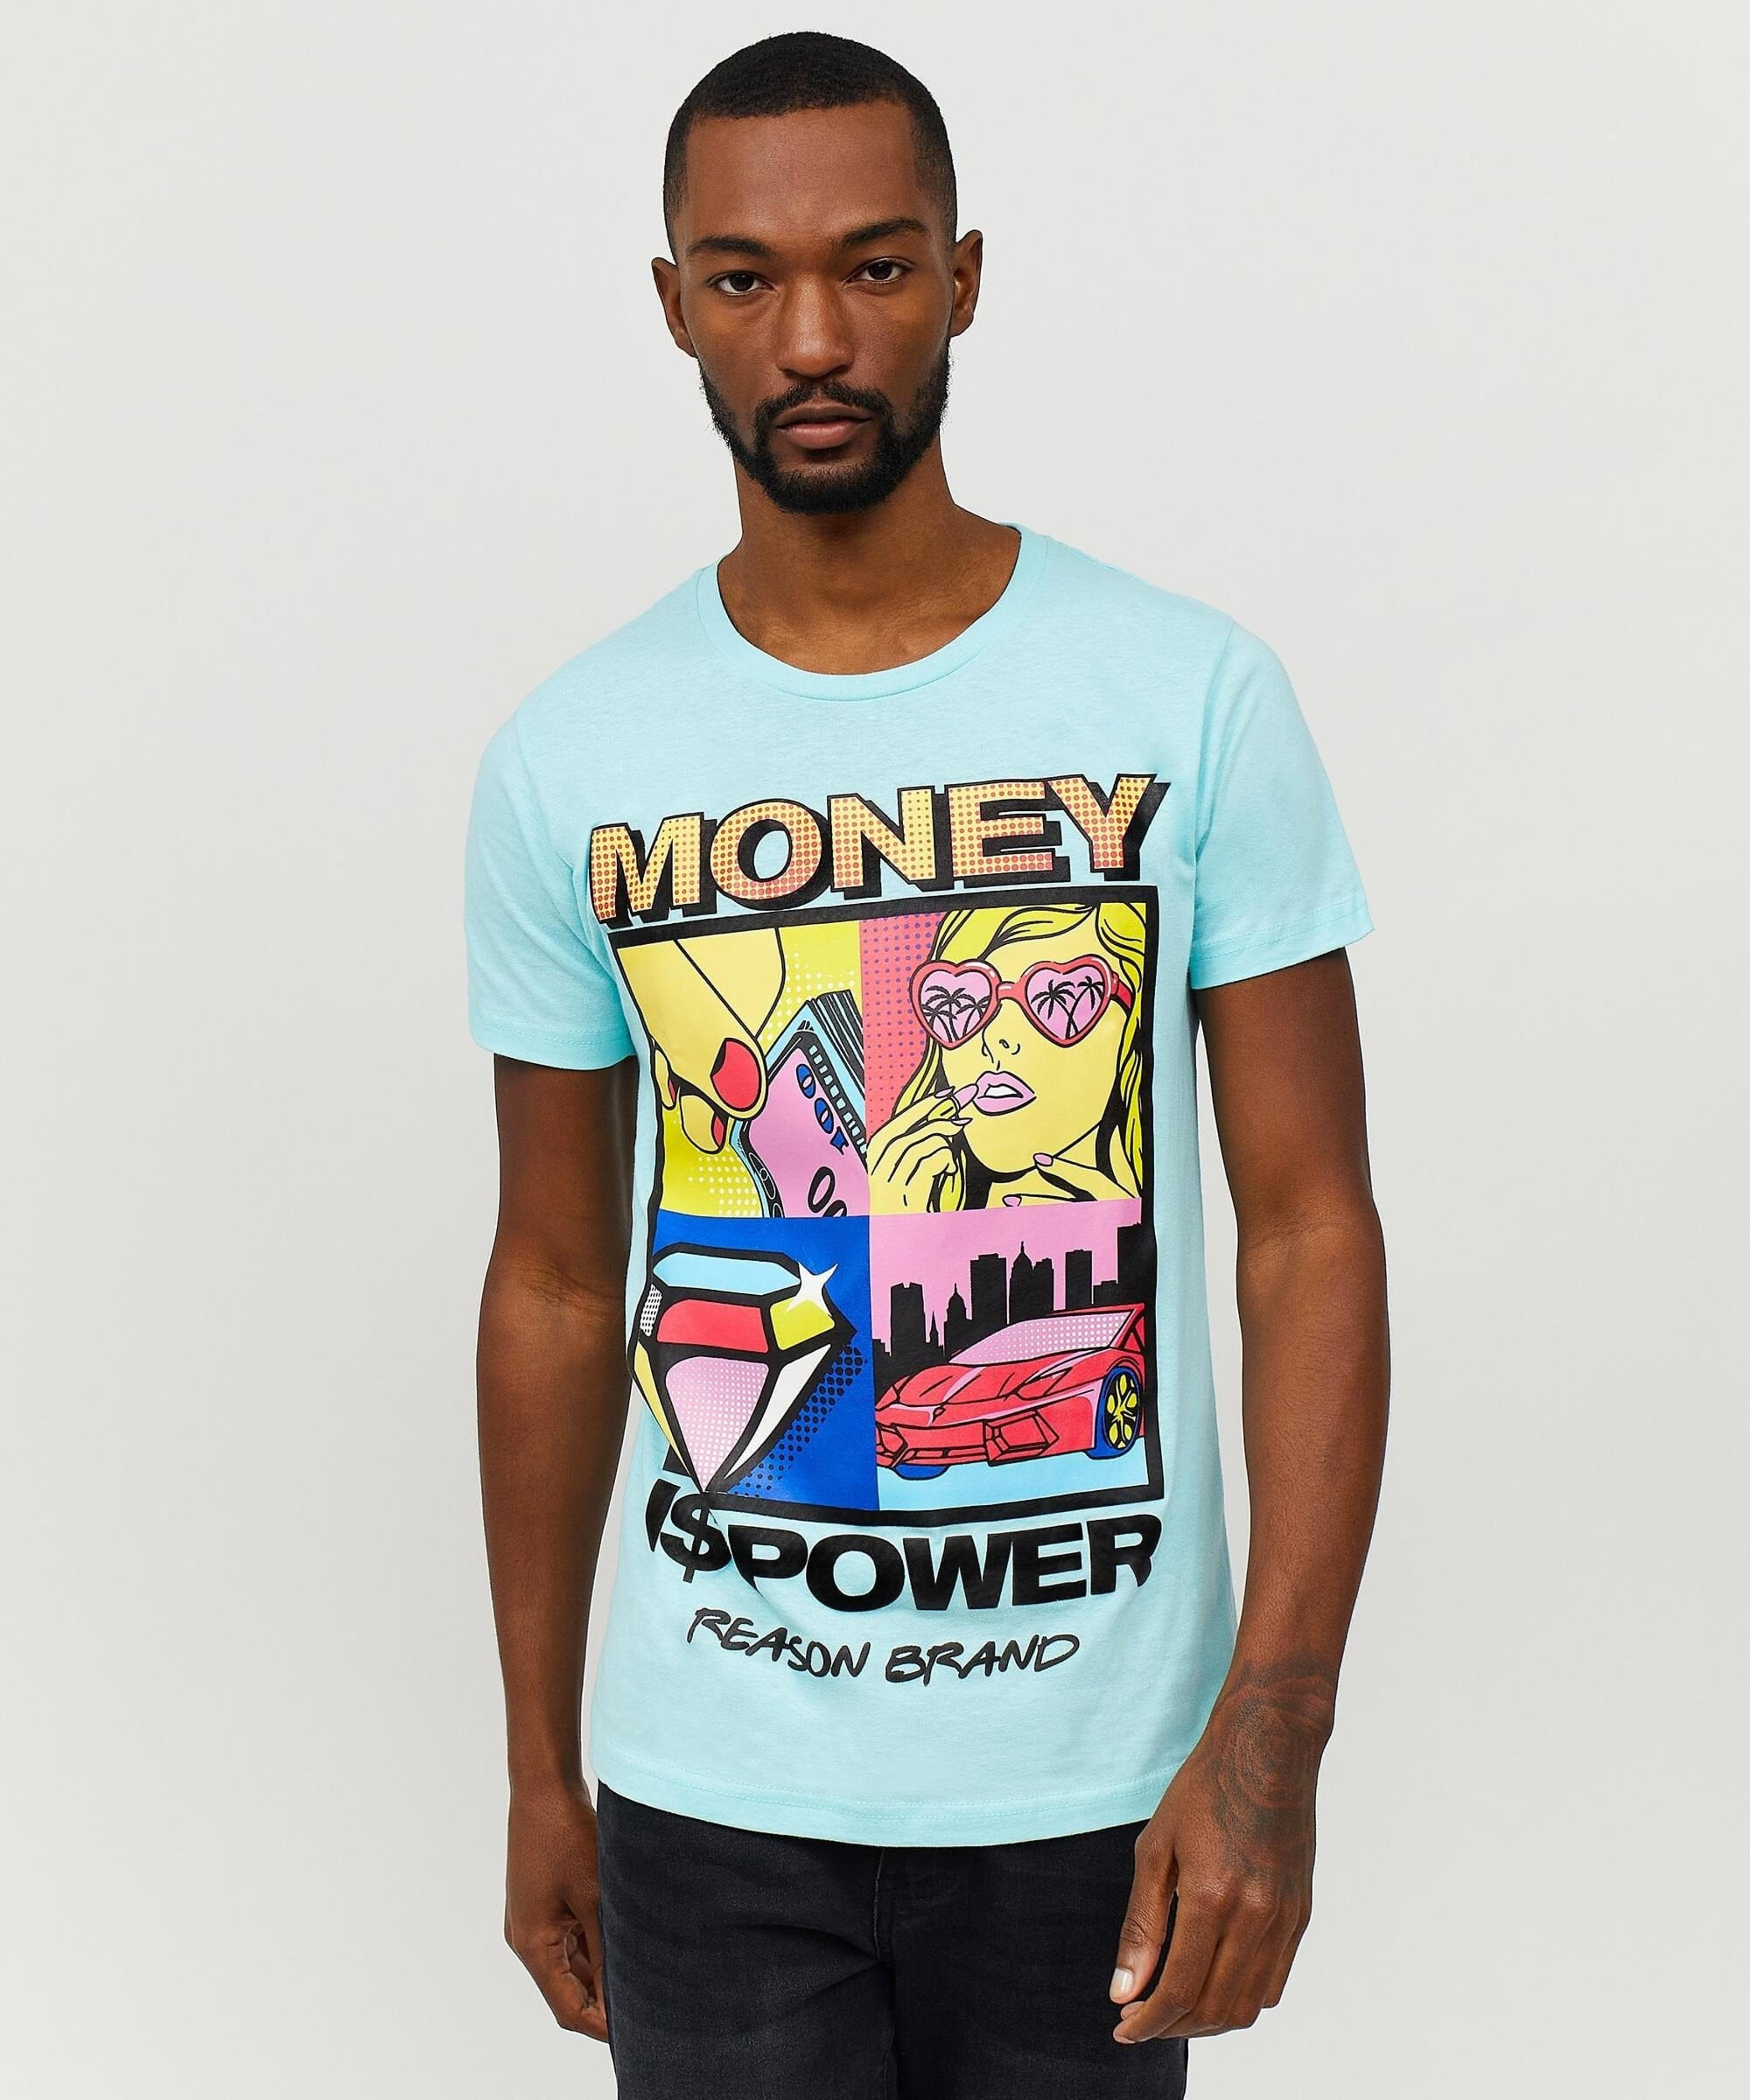 Alternate View 5 of Money Is Power Graphic Tee - Light Blue